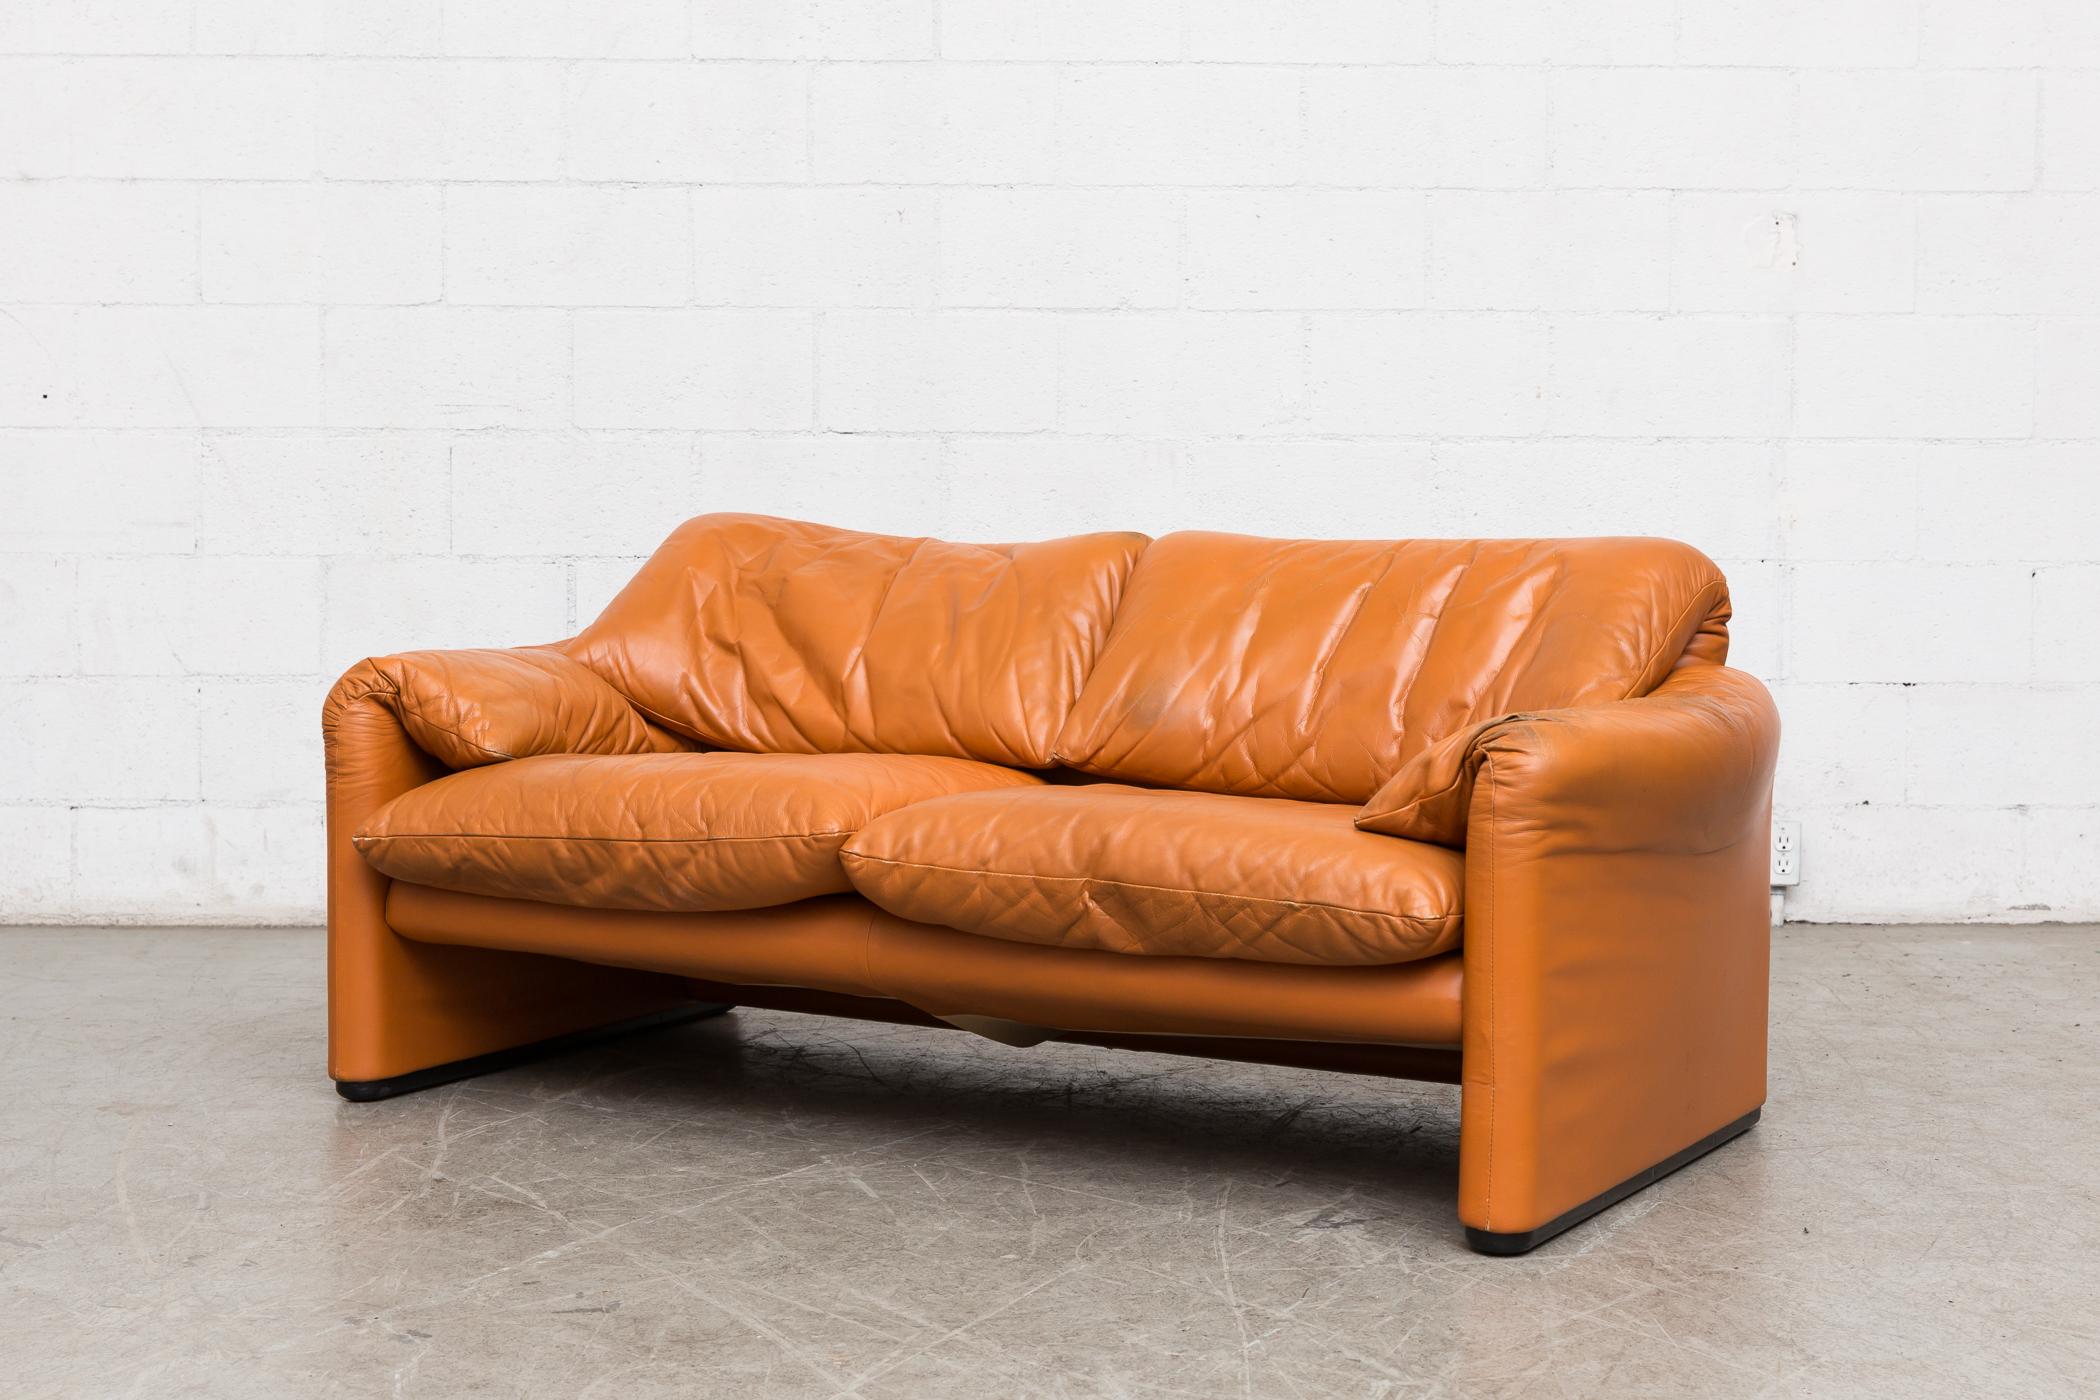 Vico Magistretti Maralunga caramel leather loveseat with fold-over cushion design. Nice patina with visible wear to the leather, some color loss. Wear consistent with age and use.